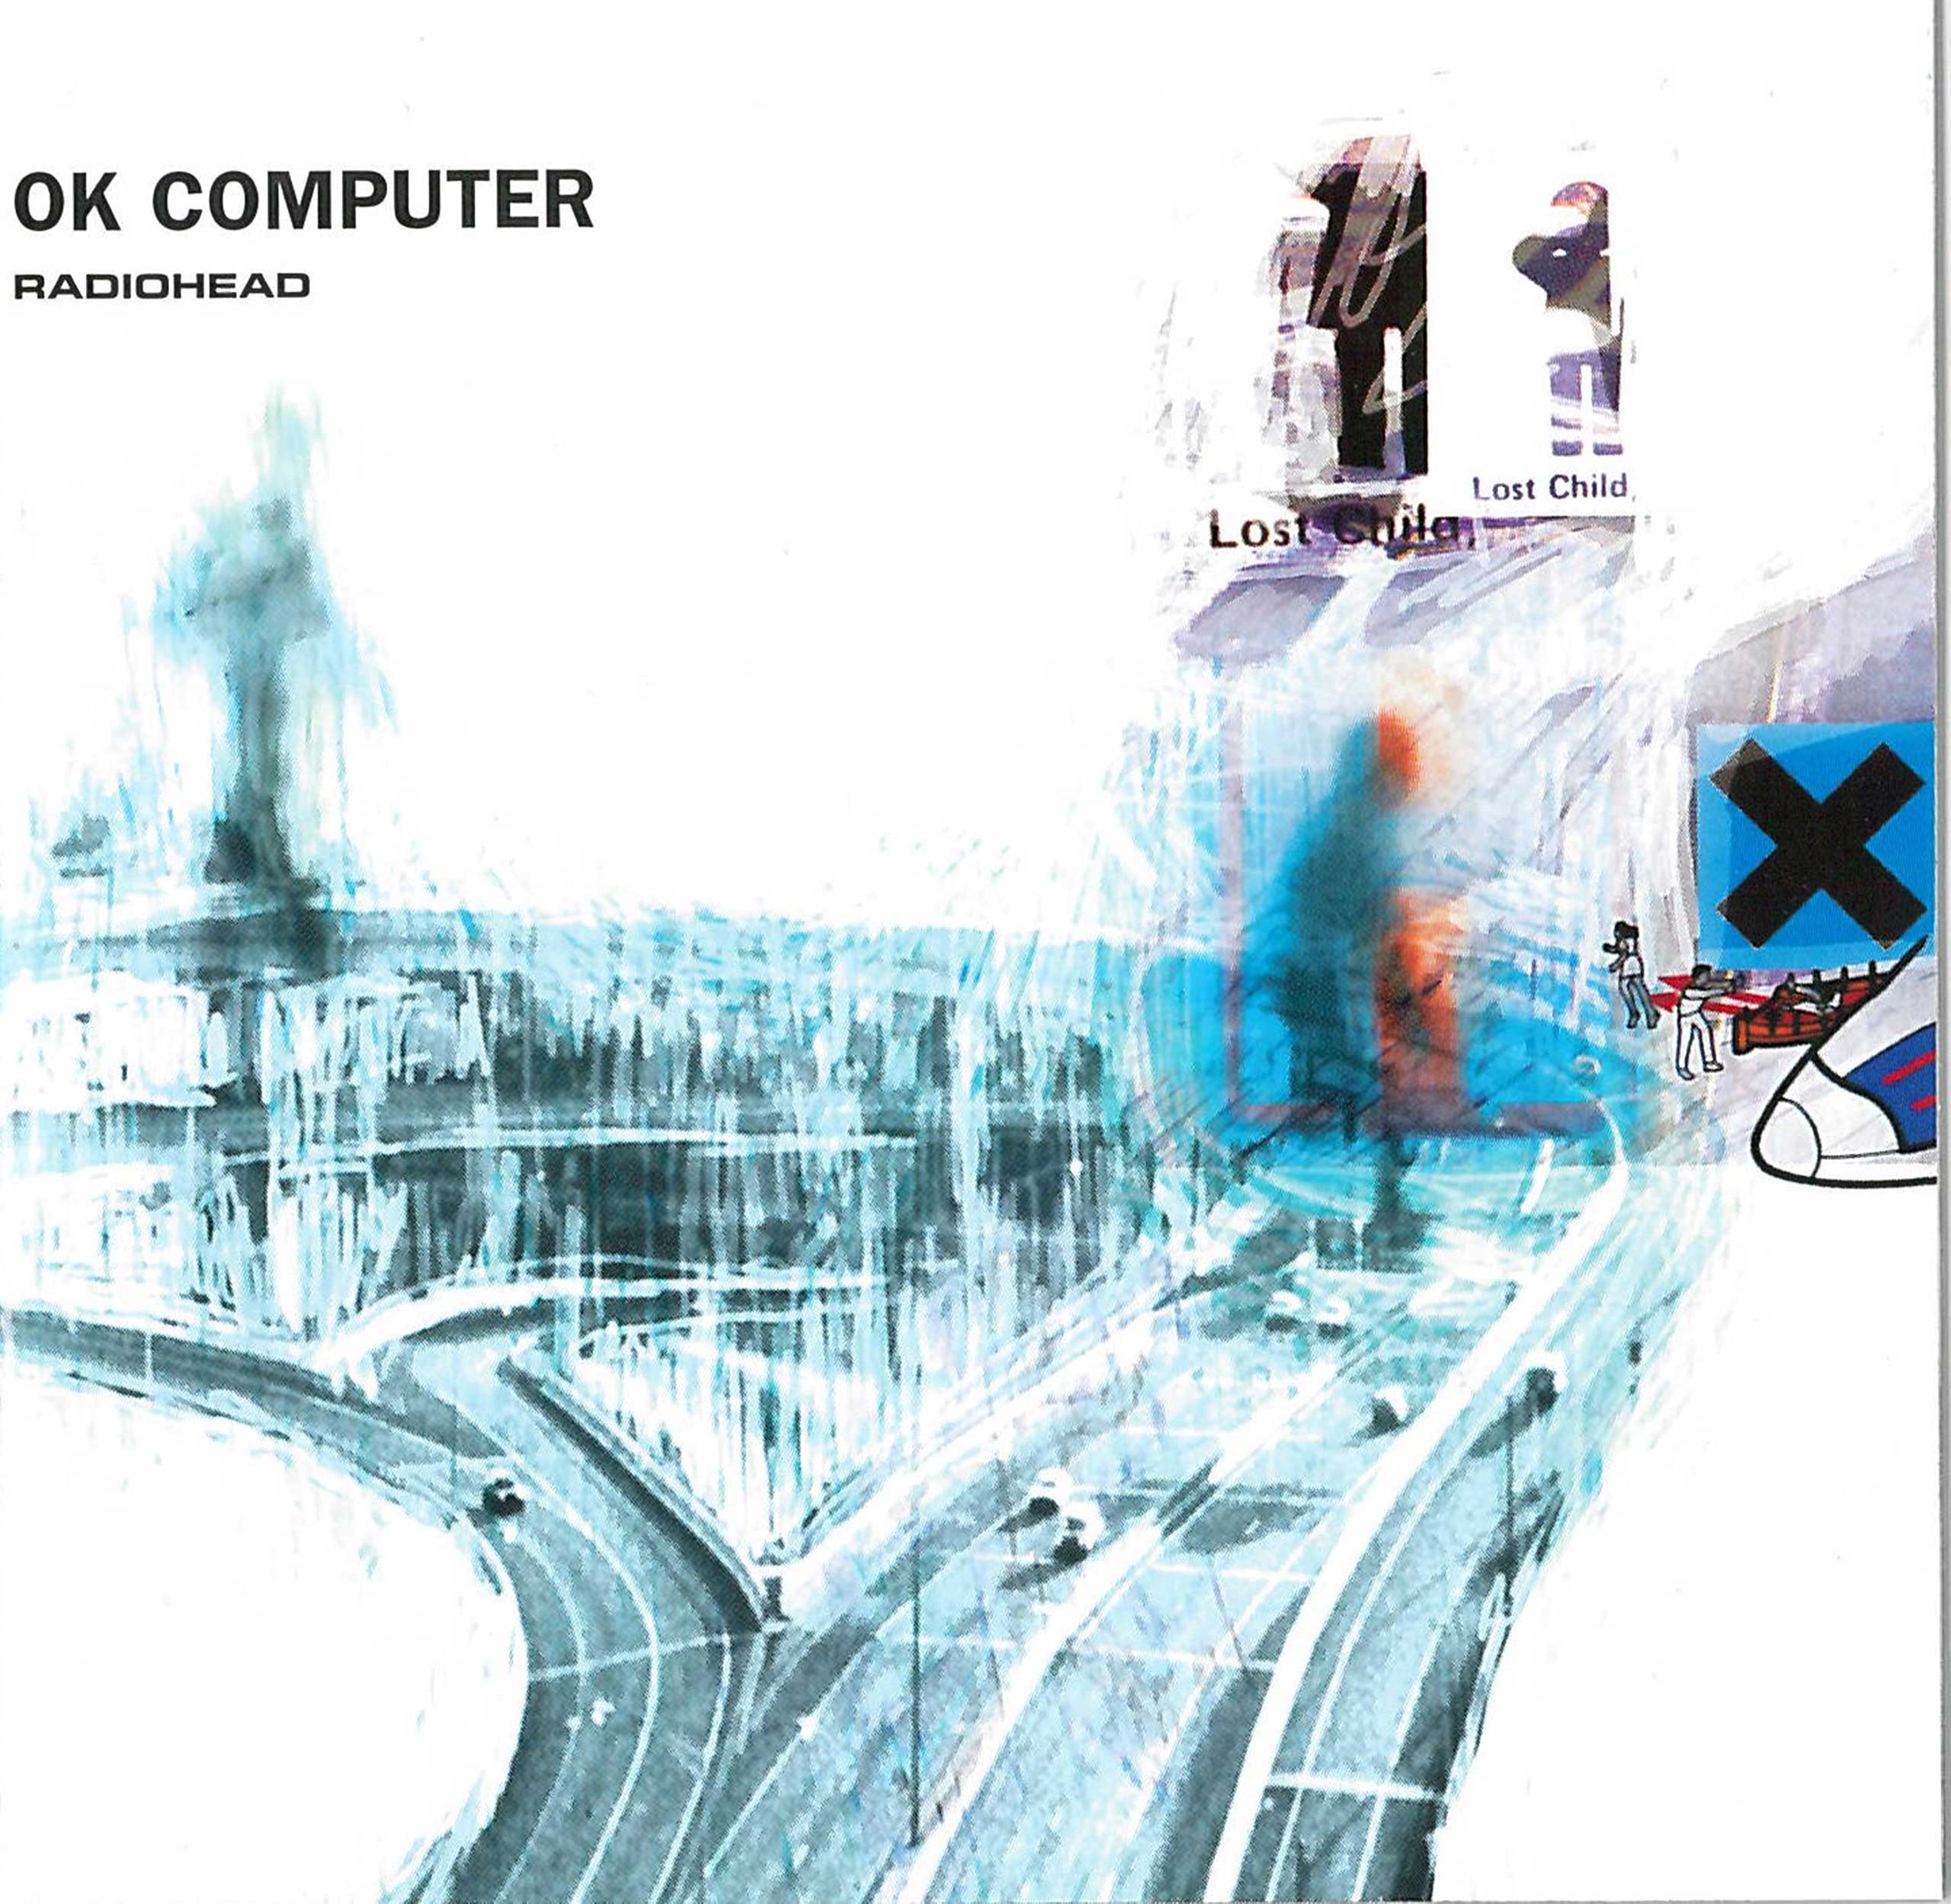 Radiohead's 1997 alt-rock album  OK Computer  was an instant classic due to its complex blend of different musical styles. (Capitol Records/Library of Congress)